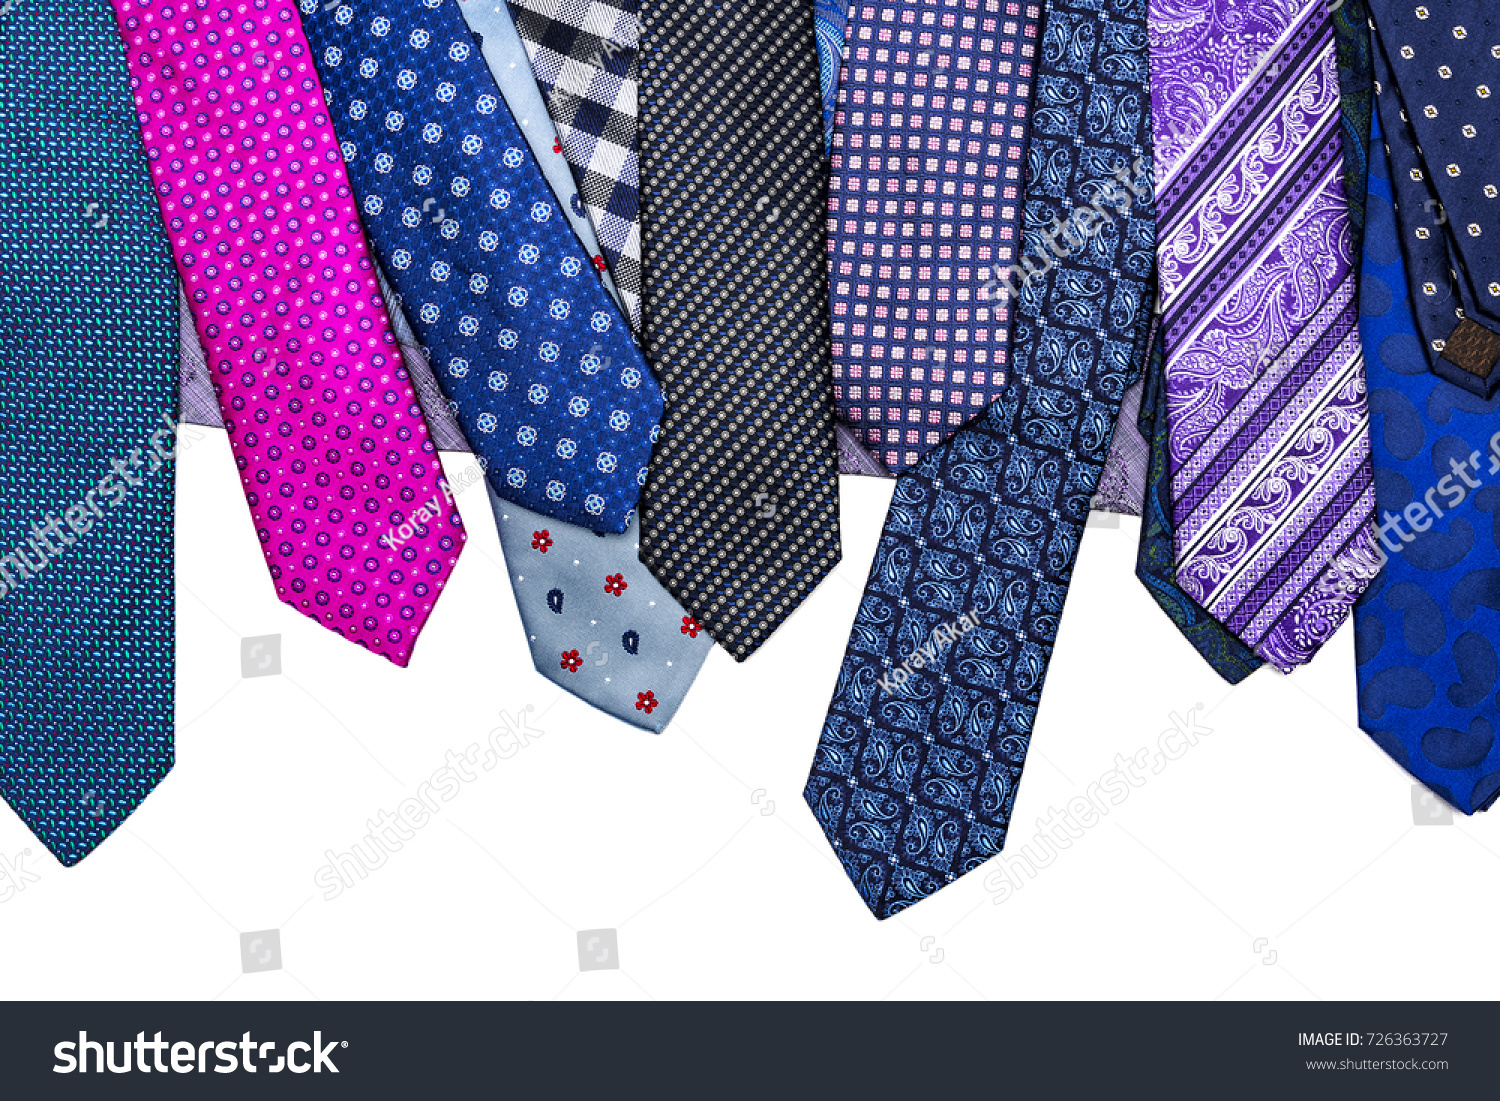 Colorful Ties Lined On White Background Stock Photo 726363727 ...